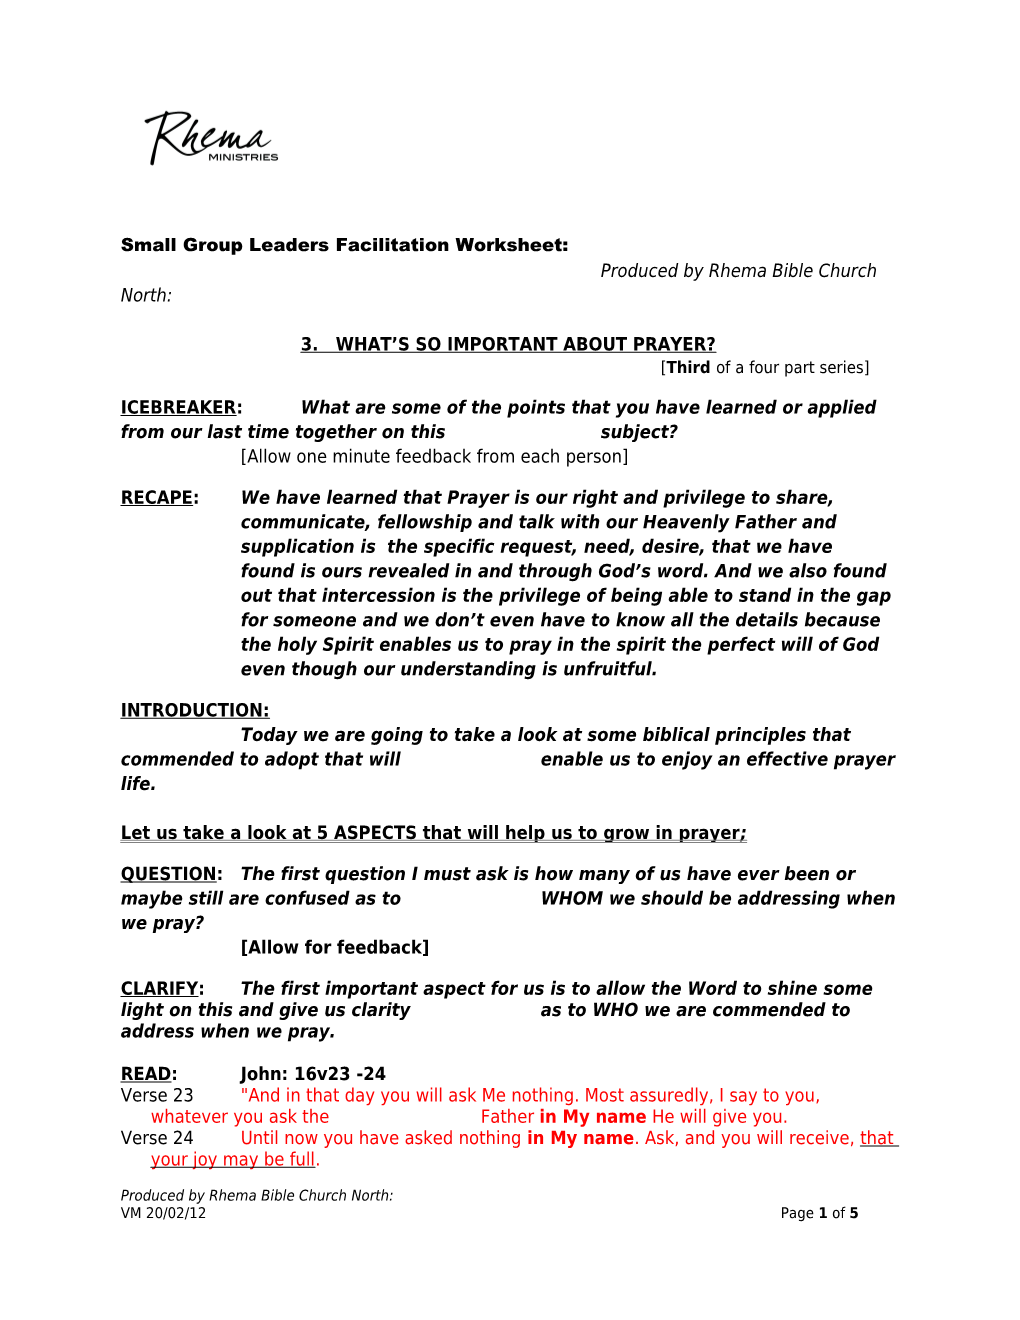 Small Group Leaders Facilitation Worksheet: Produced by Rhema Bible Church North: 3. WHAT